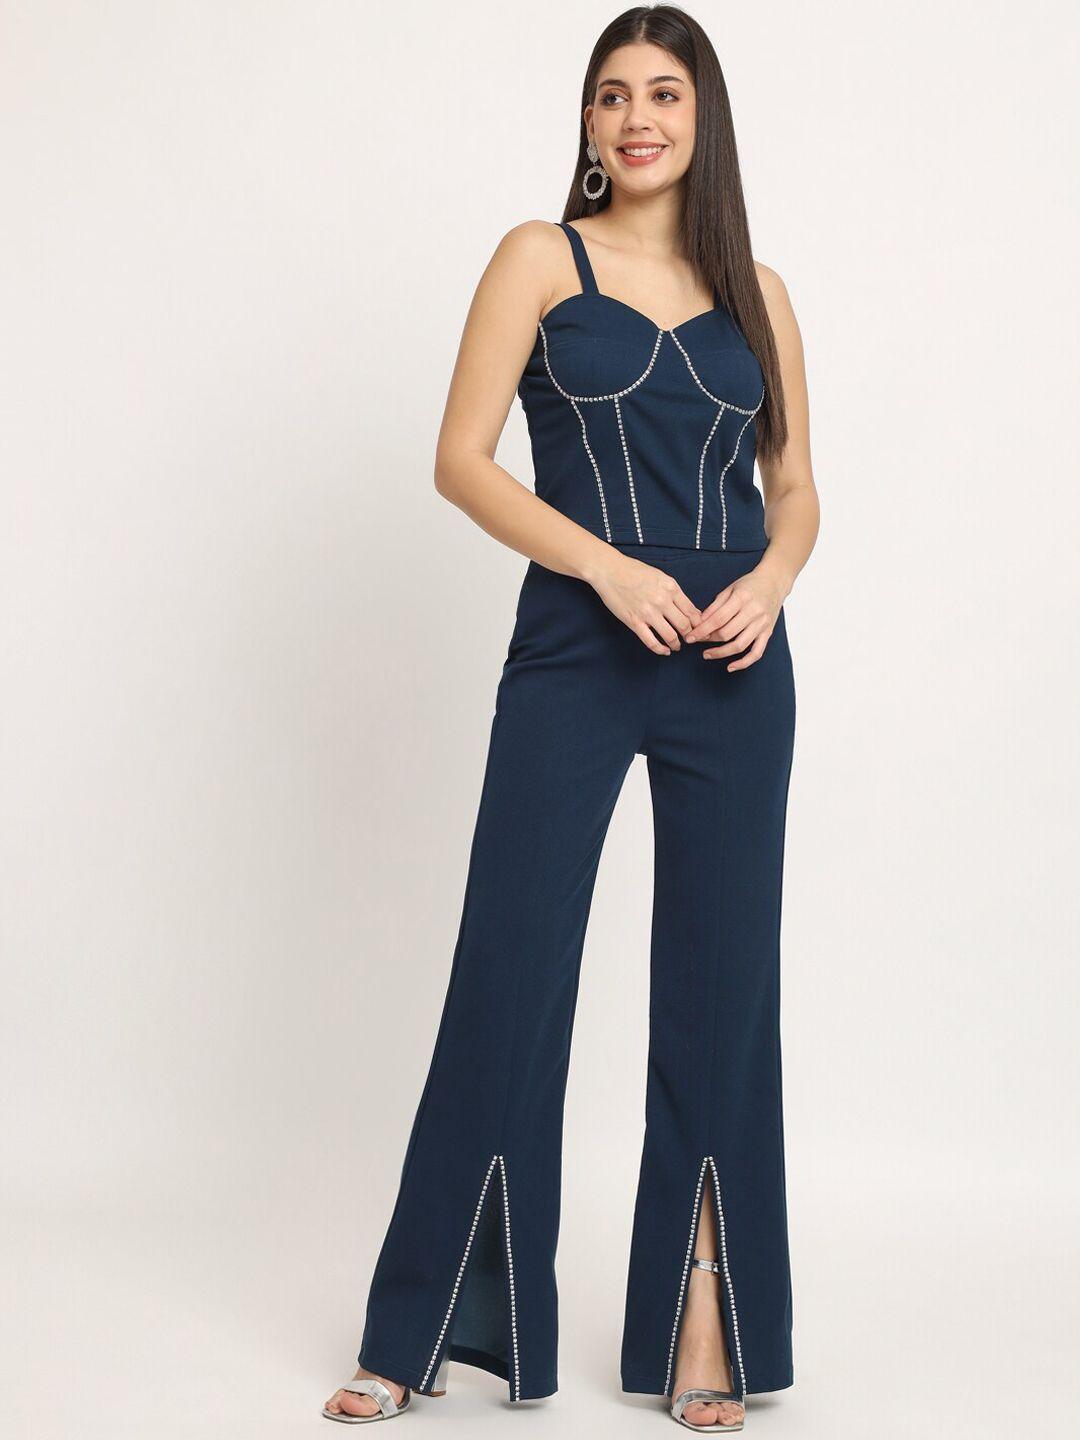 isam embellished crop top with trousers